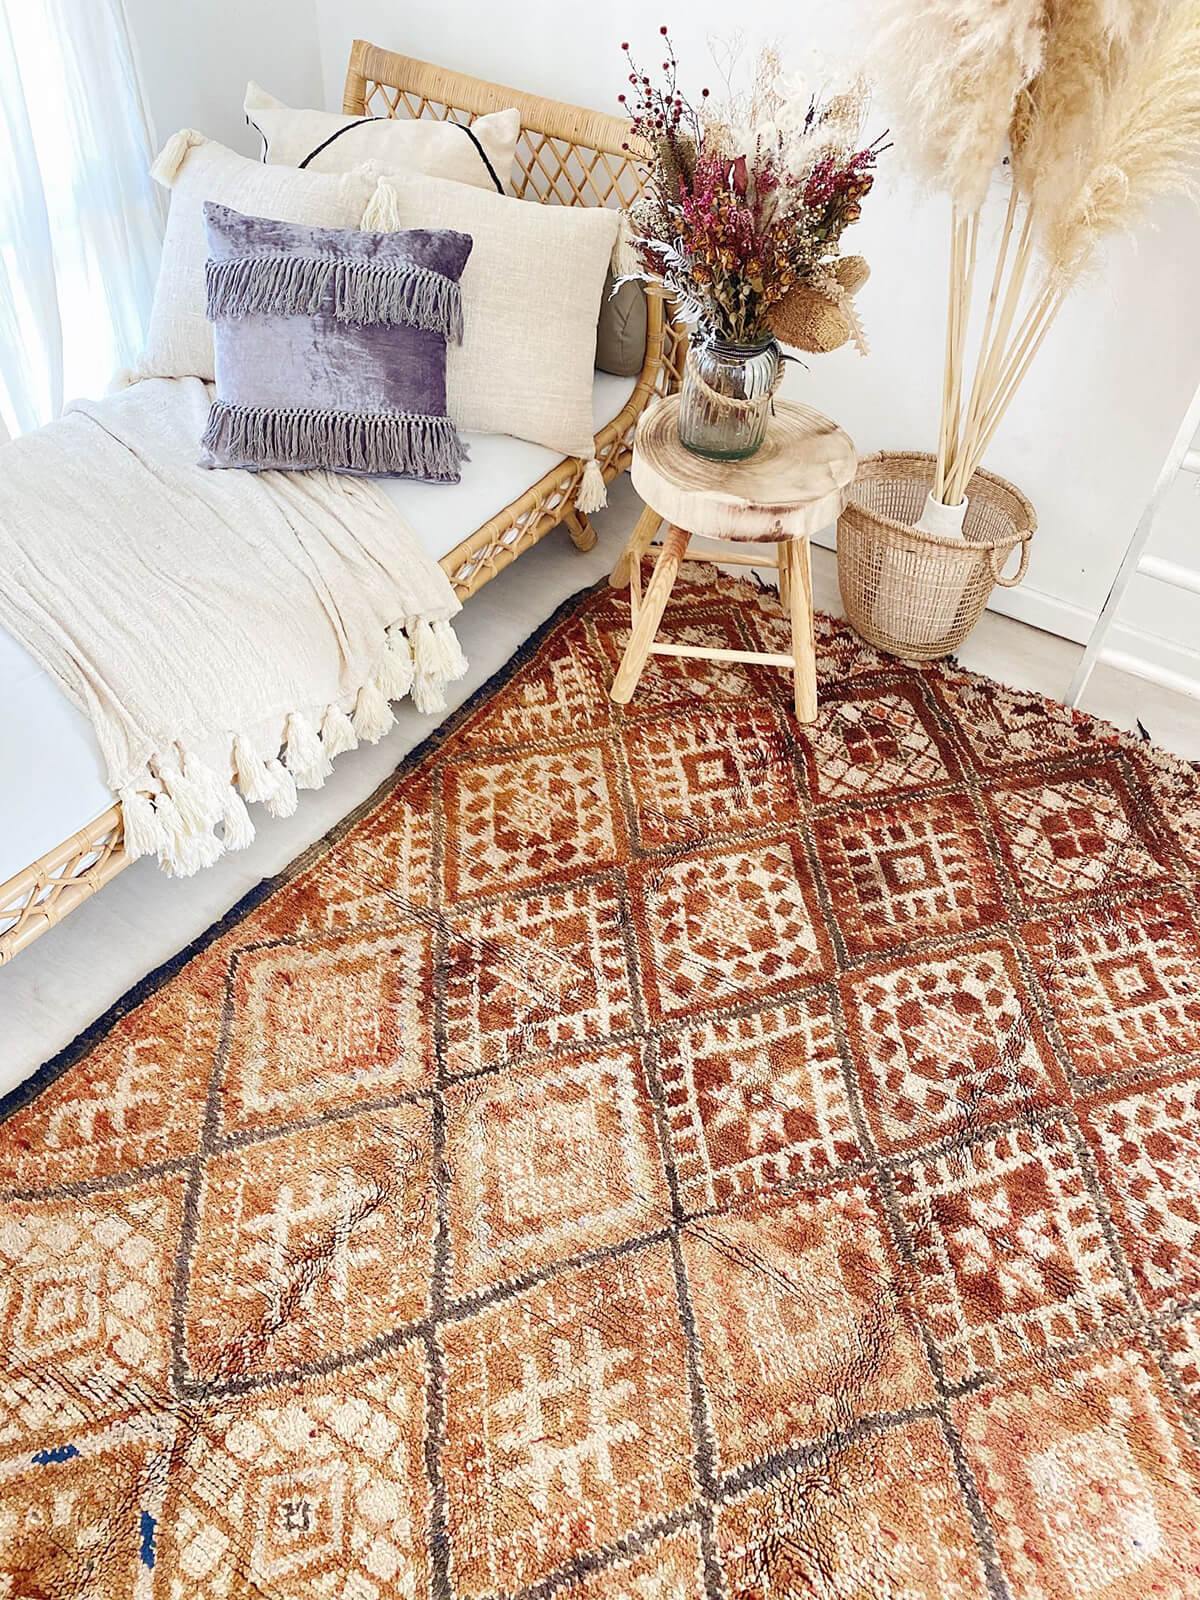 Artisanal Hand-Made Moroccan Rug with Fringed Edge